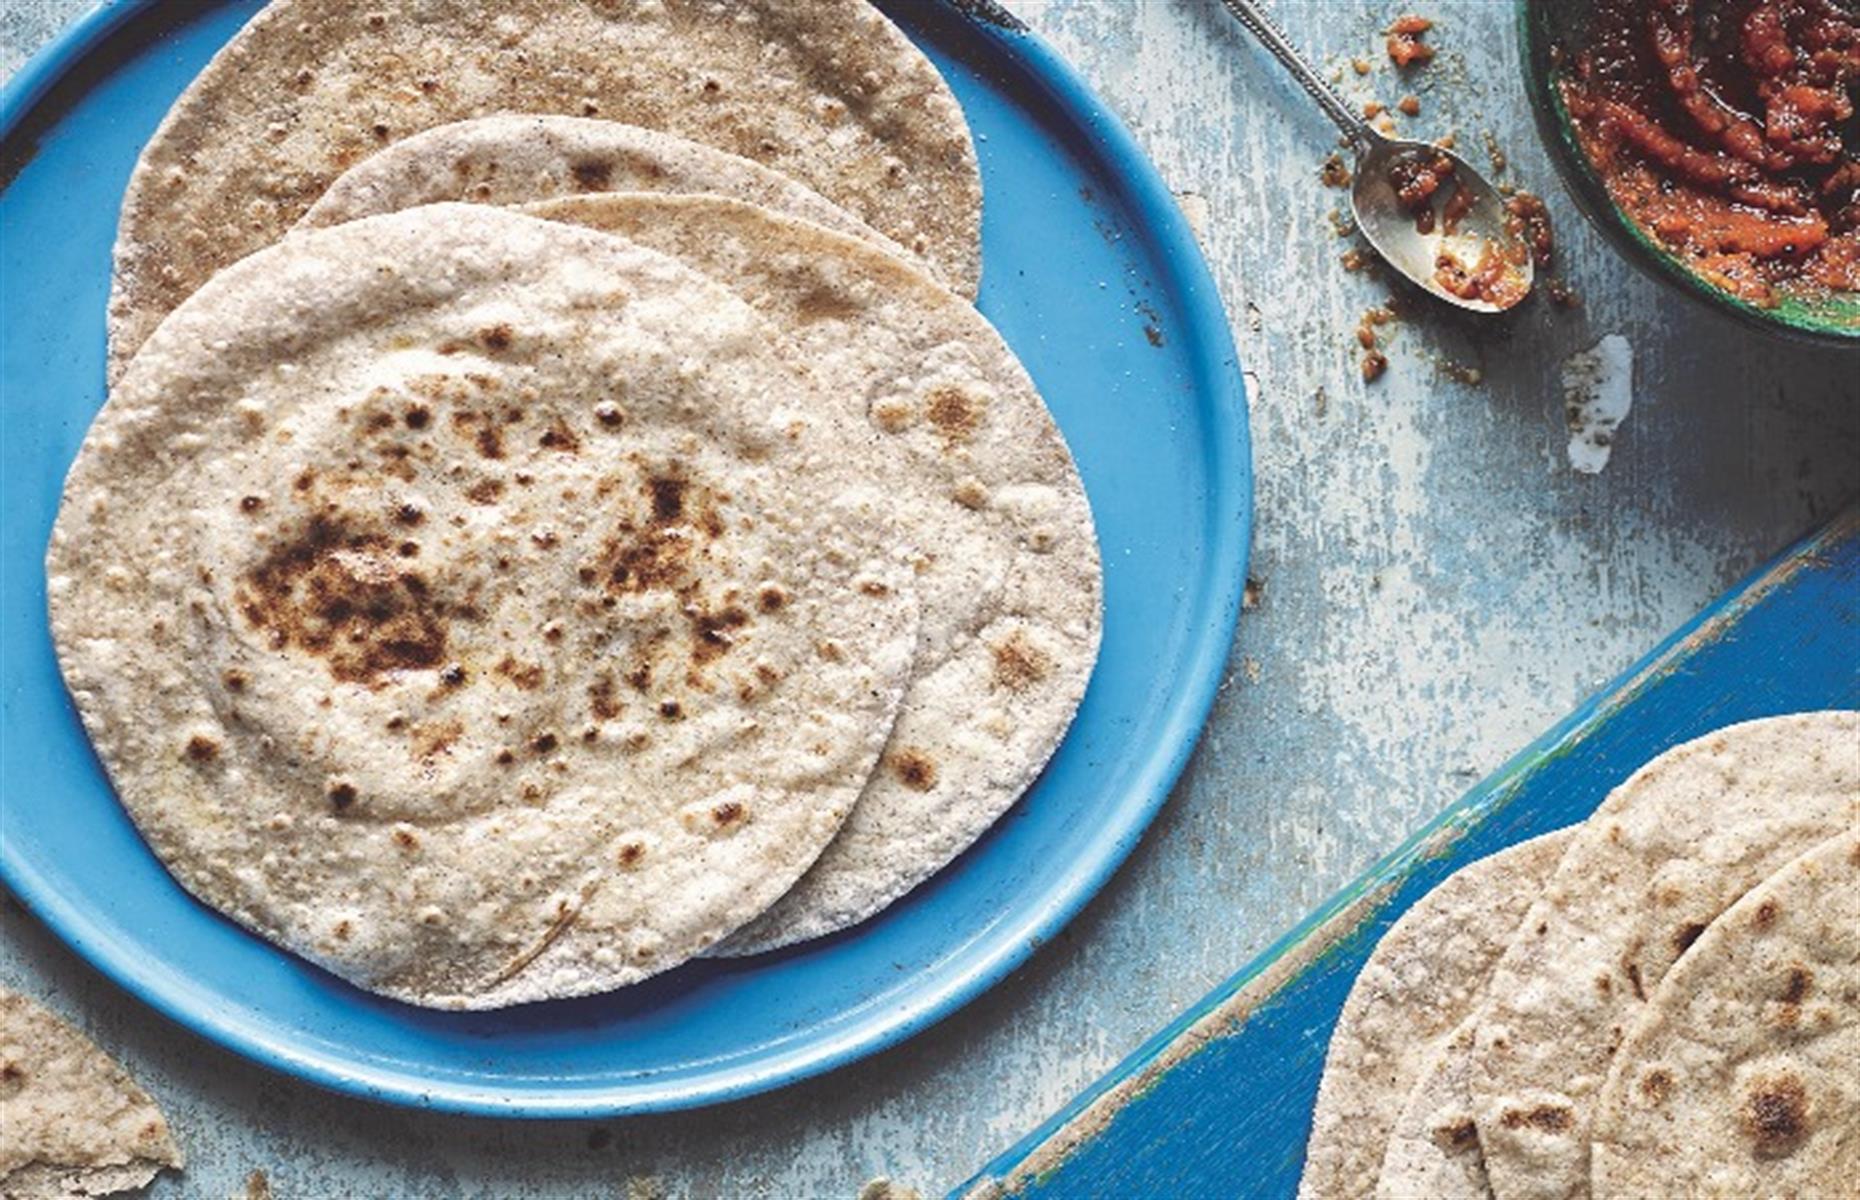 <p>Made using a finely milled wholewheat flour known as atta (or chapatti flour), these Indian flatbreads are ready in just 30 minutes and only call for two other ingredients: water and ghee. They’re great for serving with a curry and make very good wraps, too.</p>  <p><a href="https://www.lovefood.com/recipes/81559/chetna-makan-basic-chapatti-recipe"><strong>Get the recipe for chapattis here</strong></a></p>